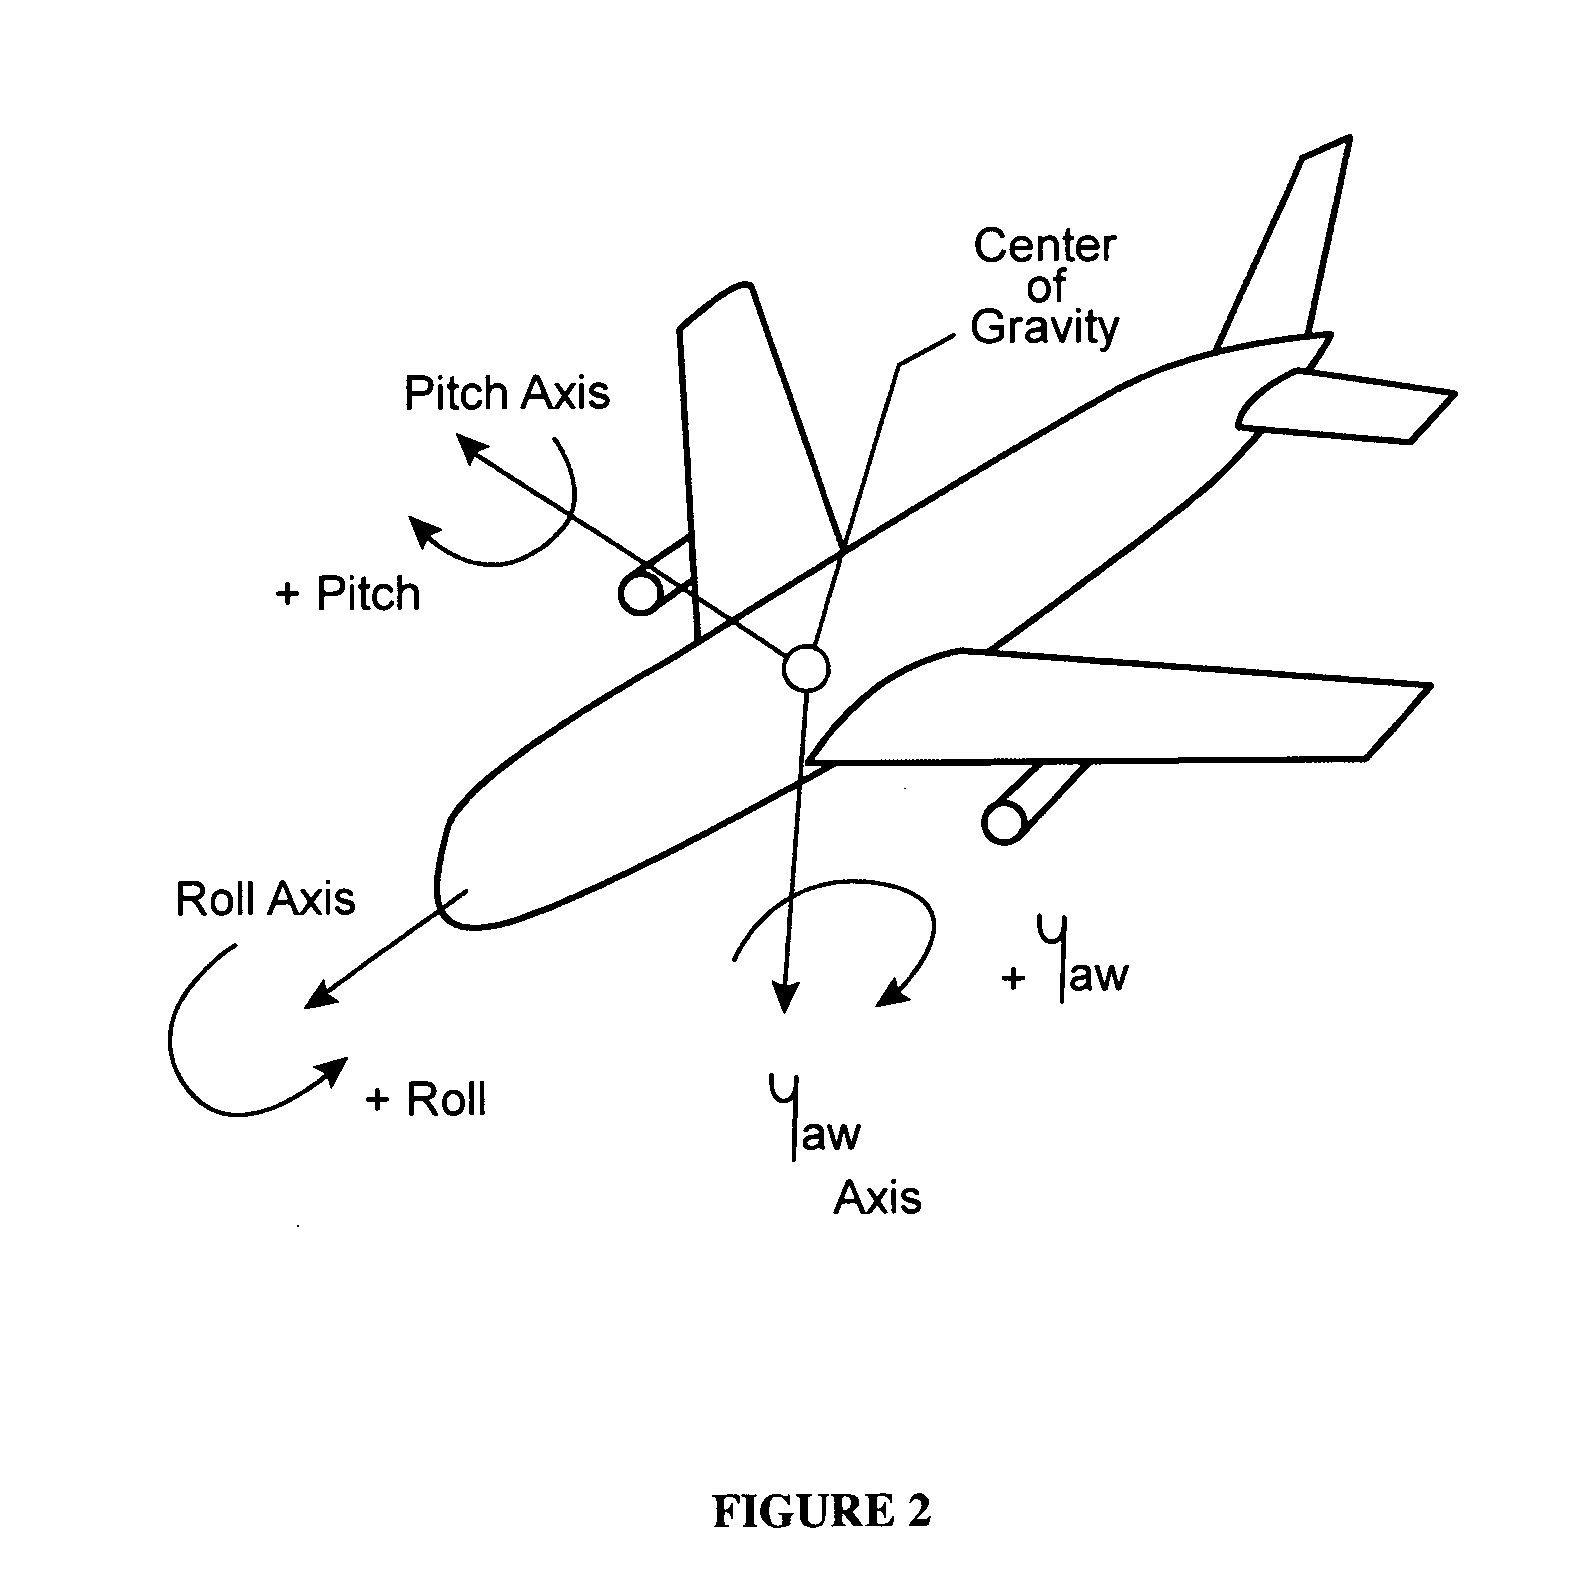 Controlled take-off and flight system using thrust differentials